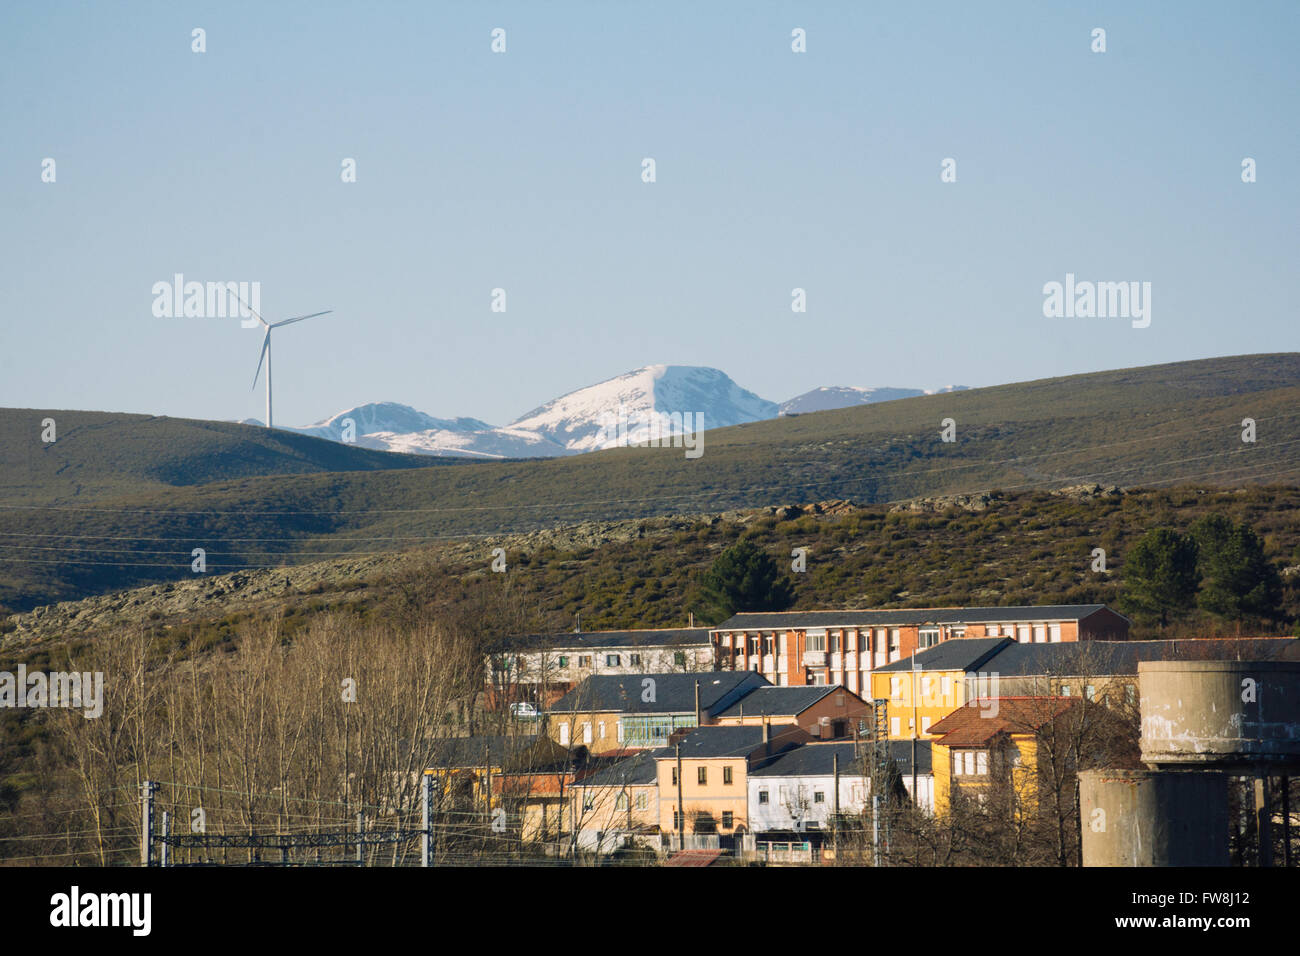 View of a snowed mountain in the distance, a wind farm and a village in the foreground on a sunny day. Stock Photo